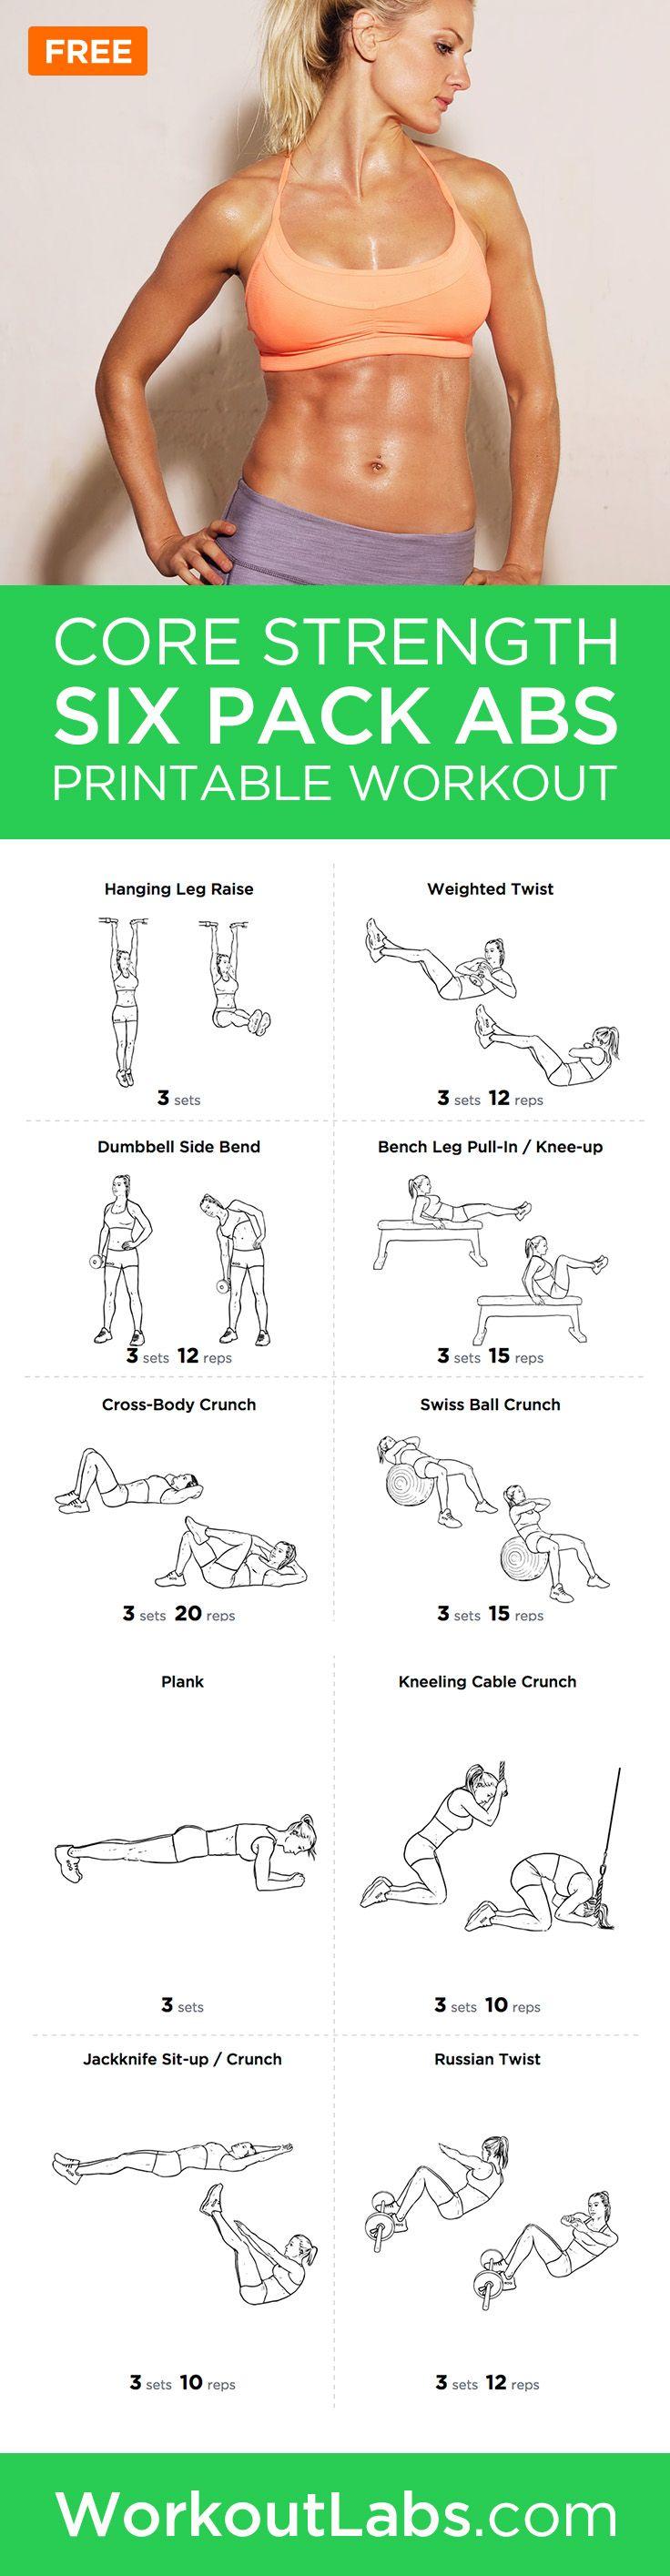 Wedding - Six Pack Abs Core Strength Printable Workout